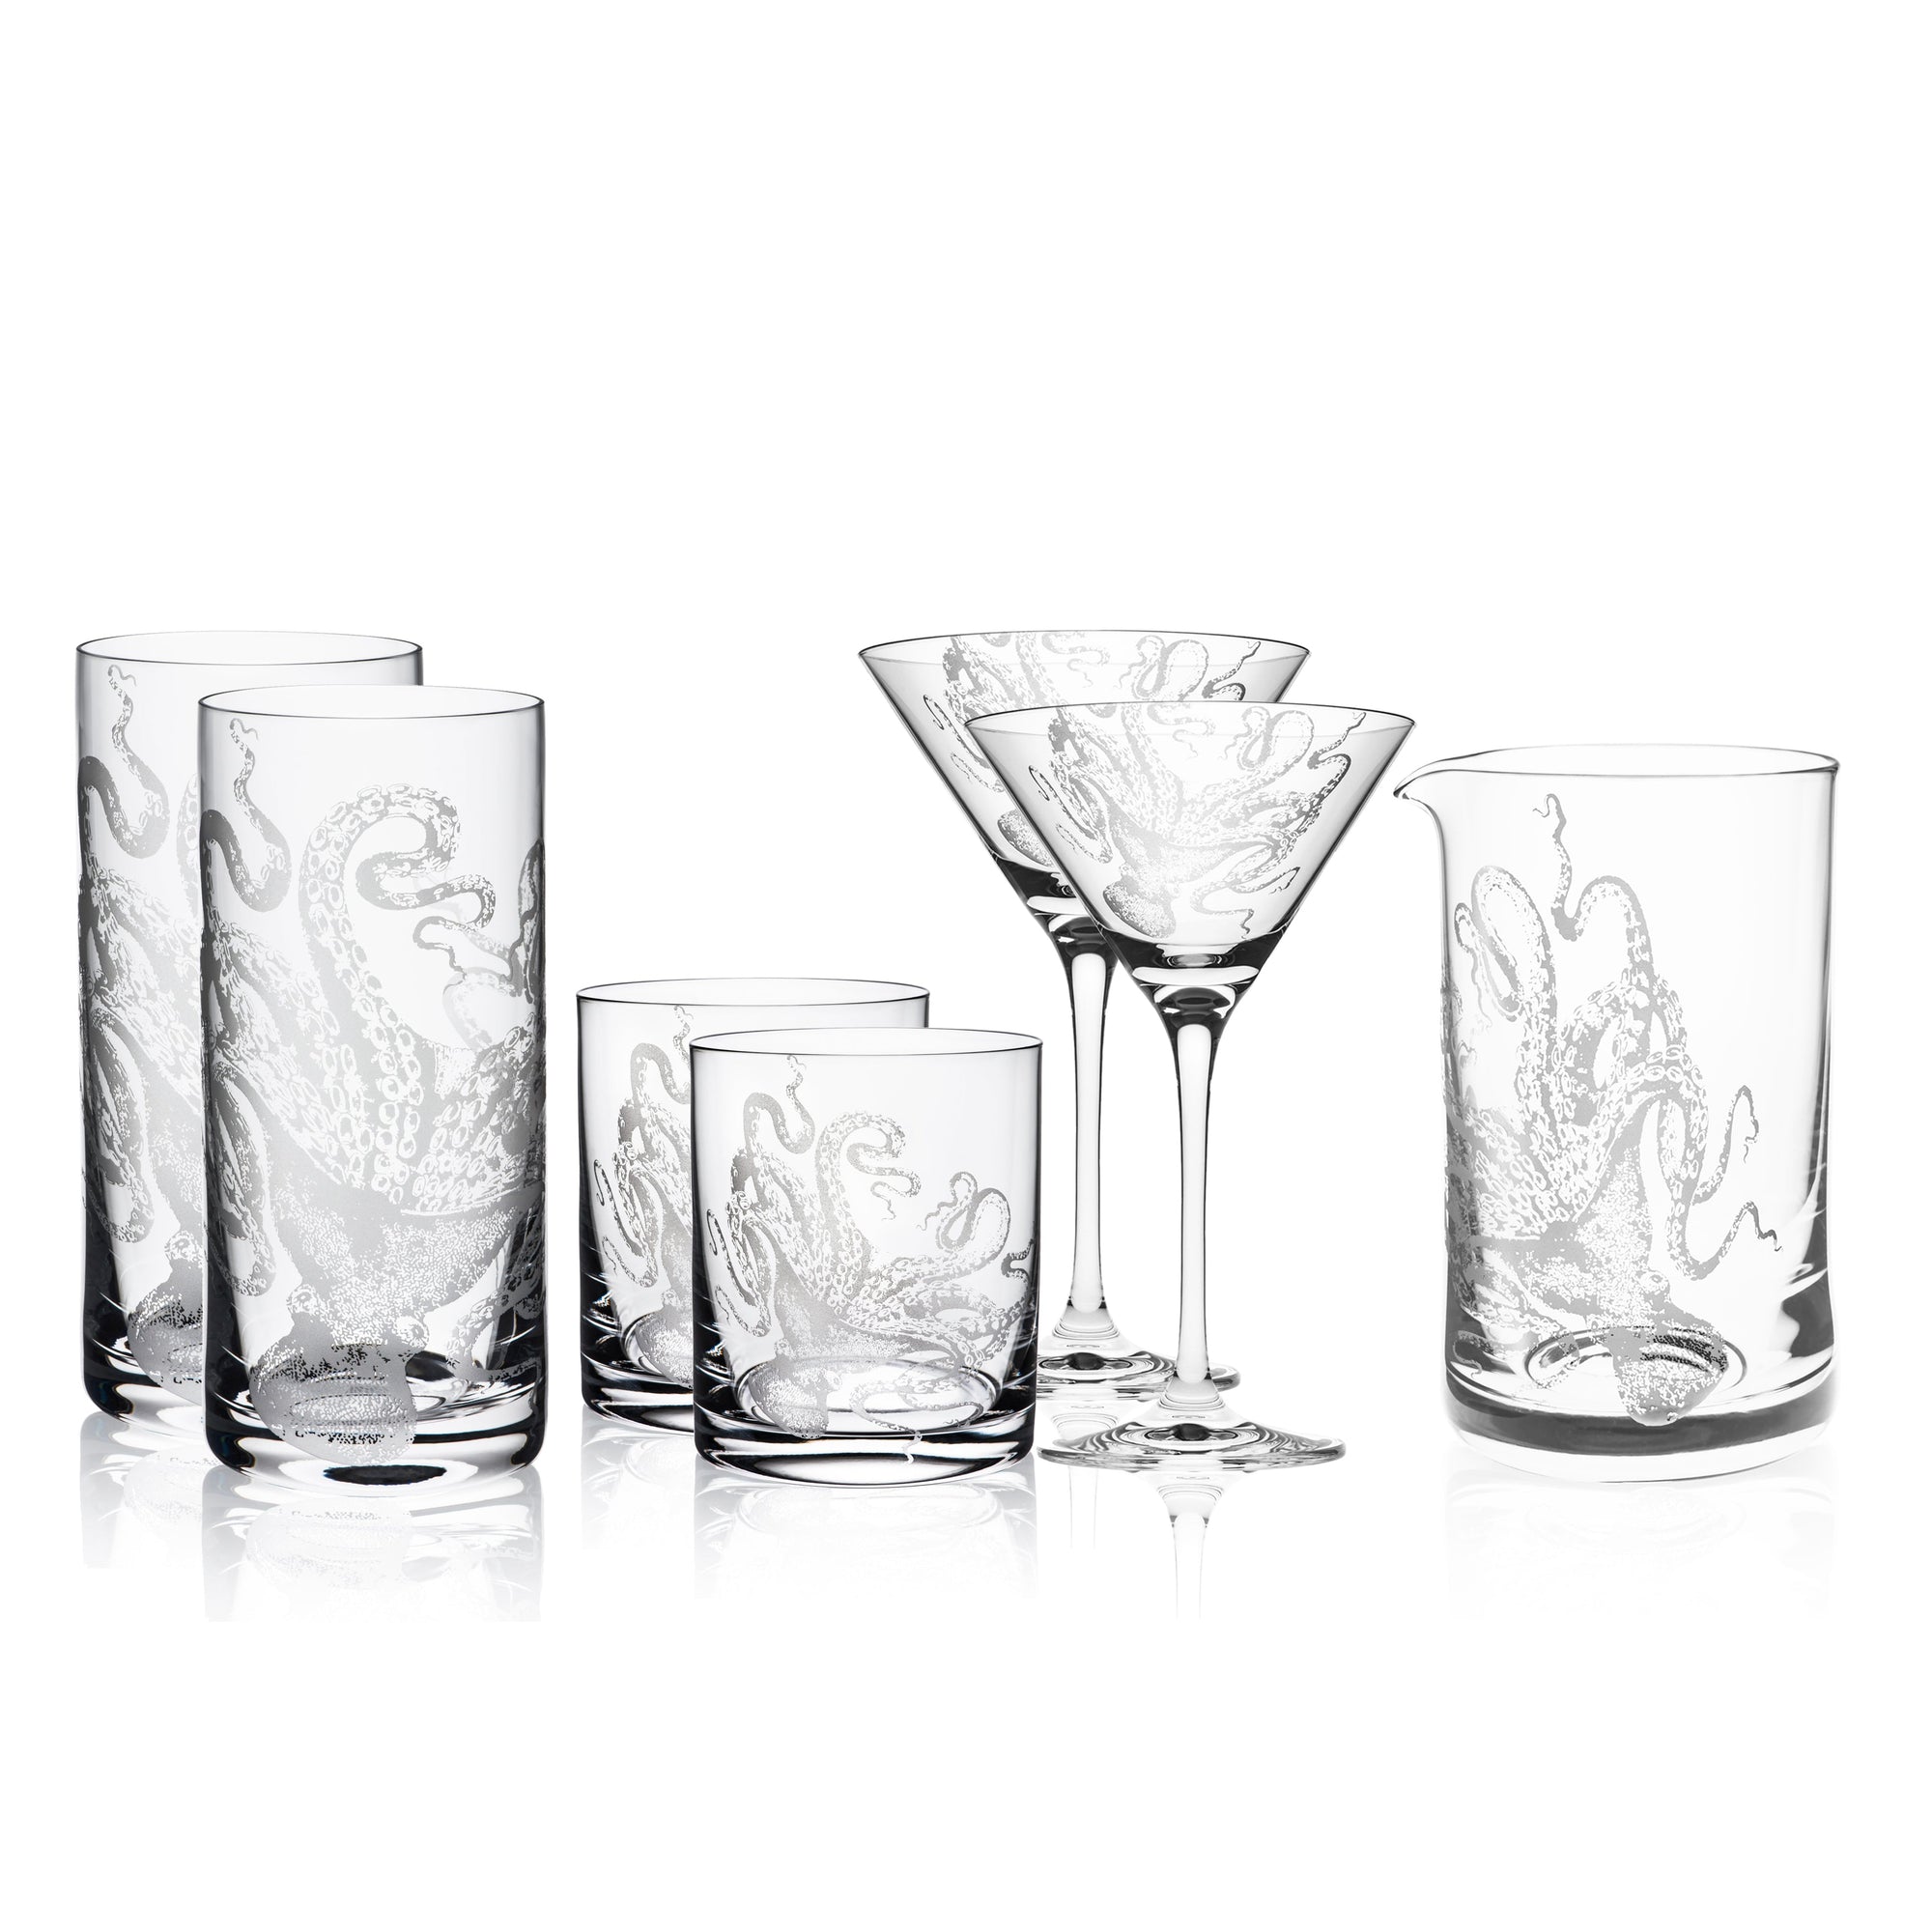 A collection of octopus glassware, including the "I Love Lucy" Cocktail Collection by Caskata Artisanal Home with etched octopus designs, features four highball glasses, two crystal cocktail glasses, and two tumblers, all arranged against a white background.